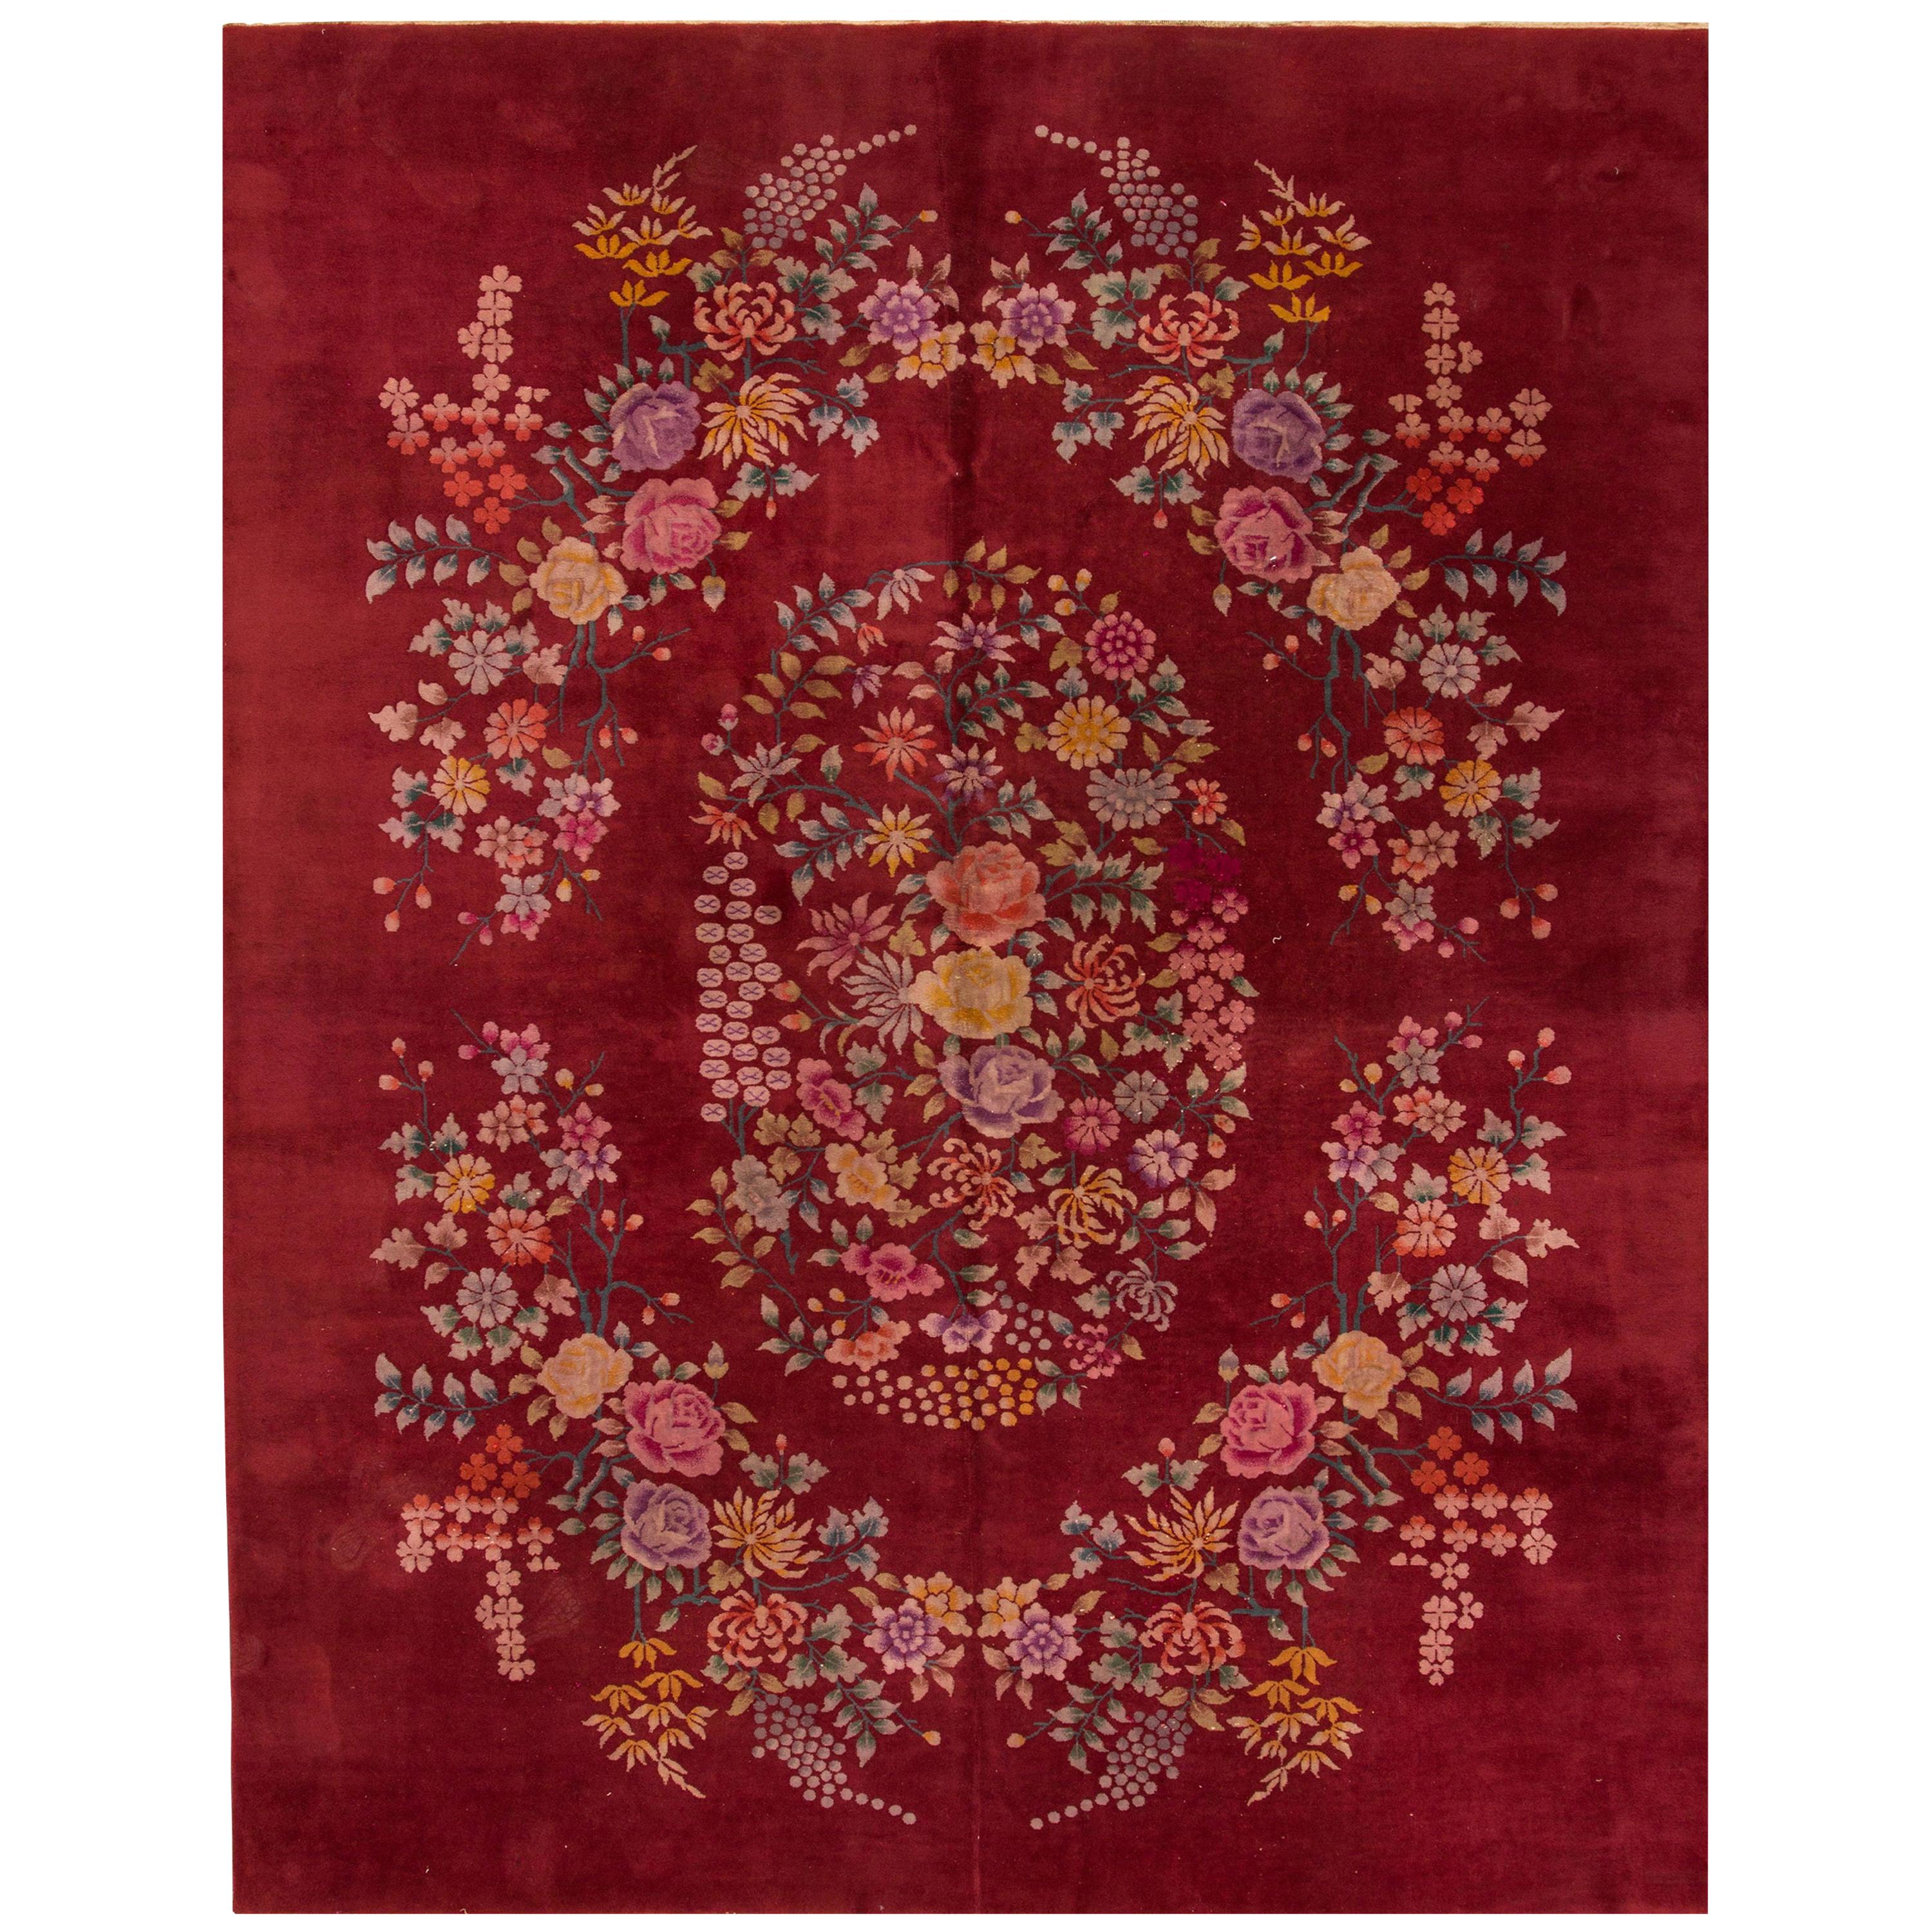 Antique Red Chinese Art Deco Rug